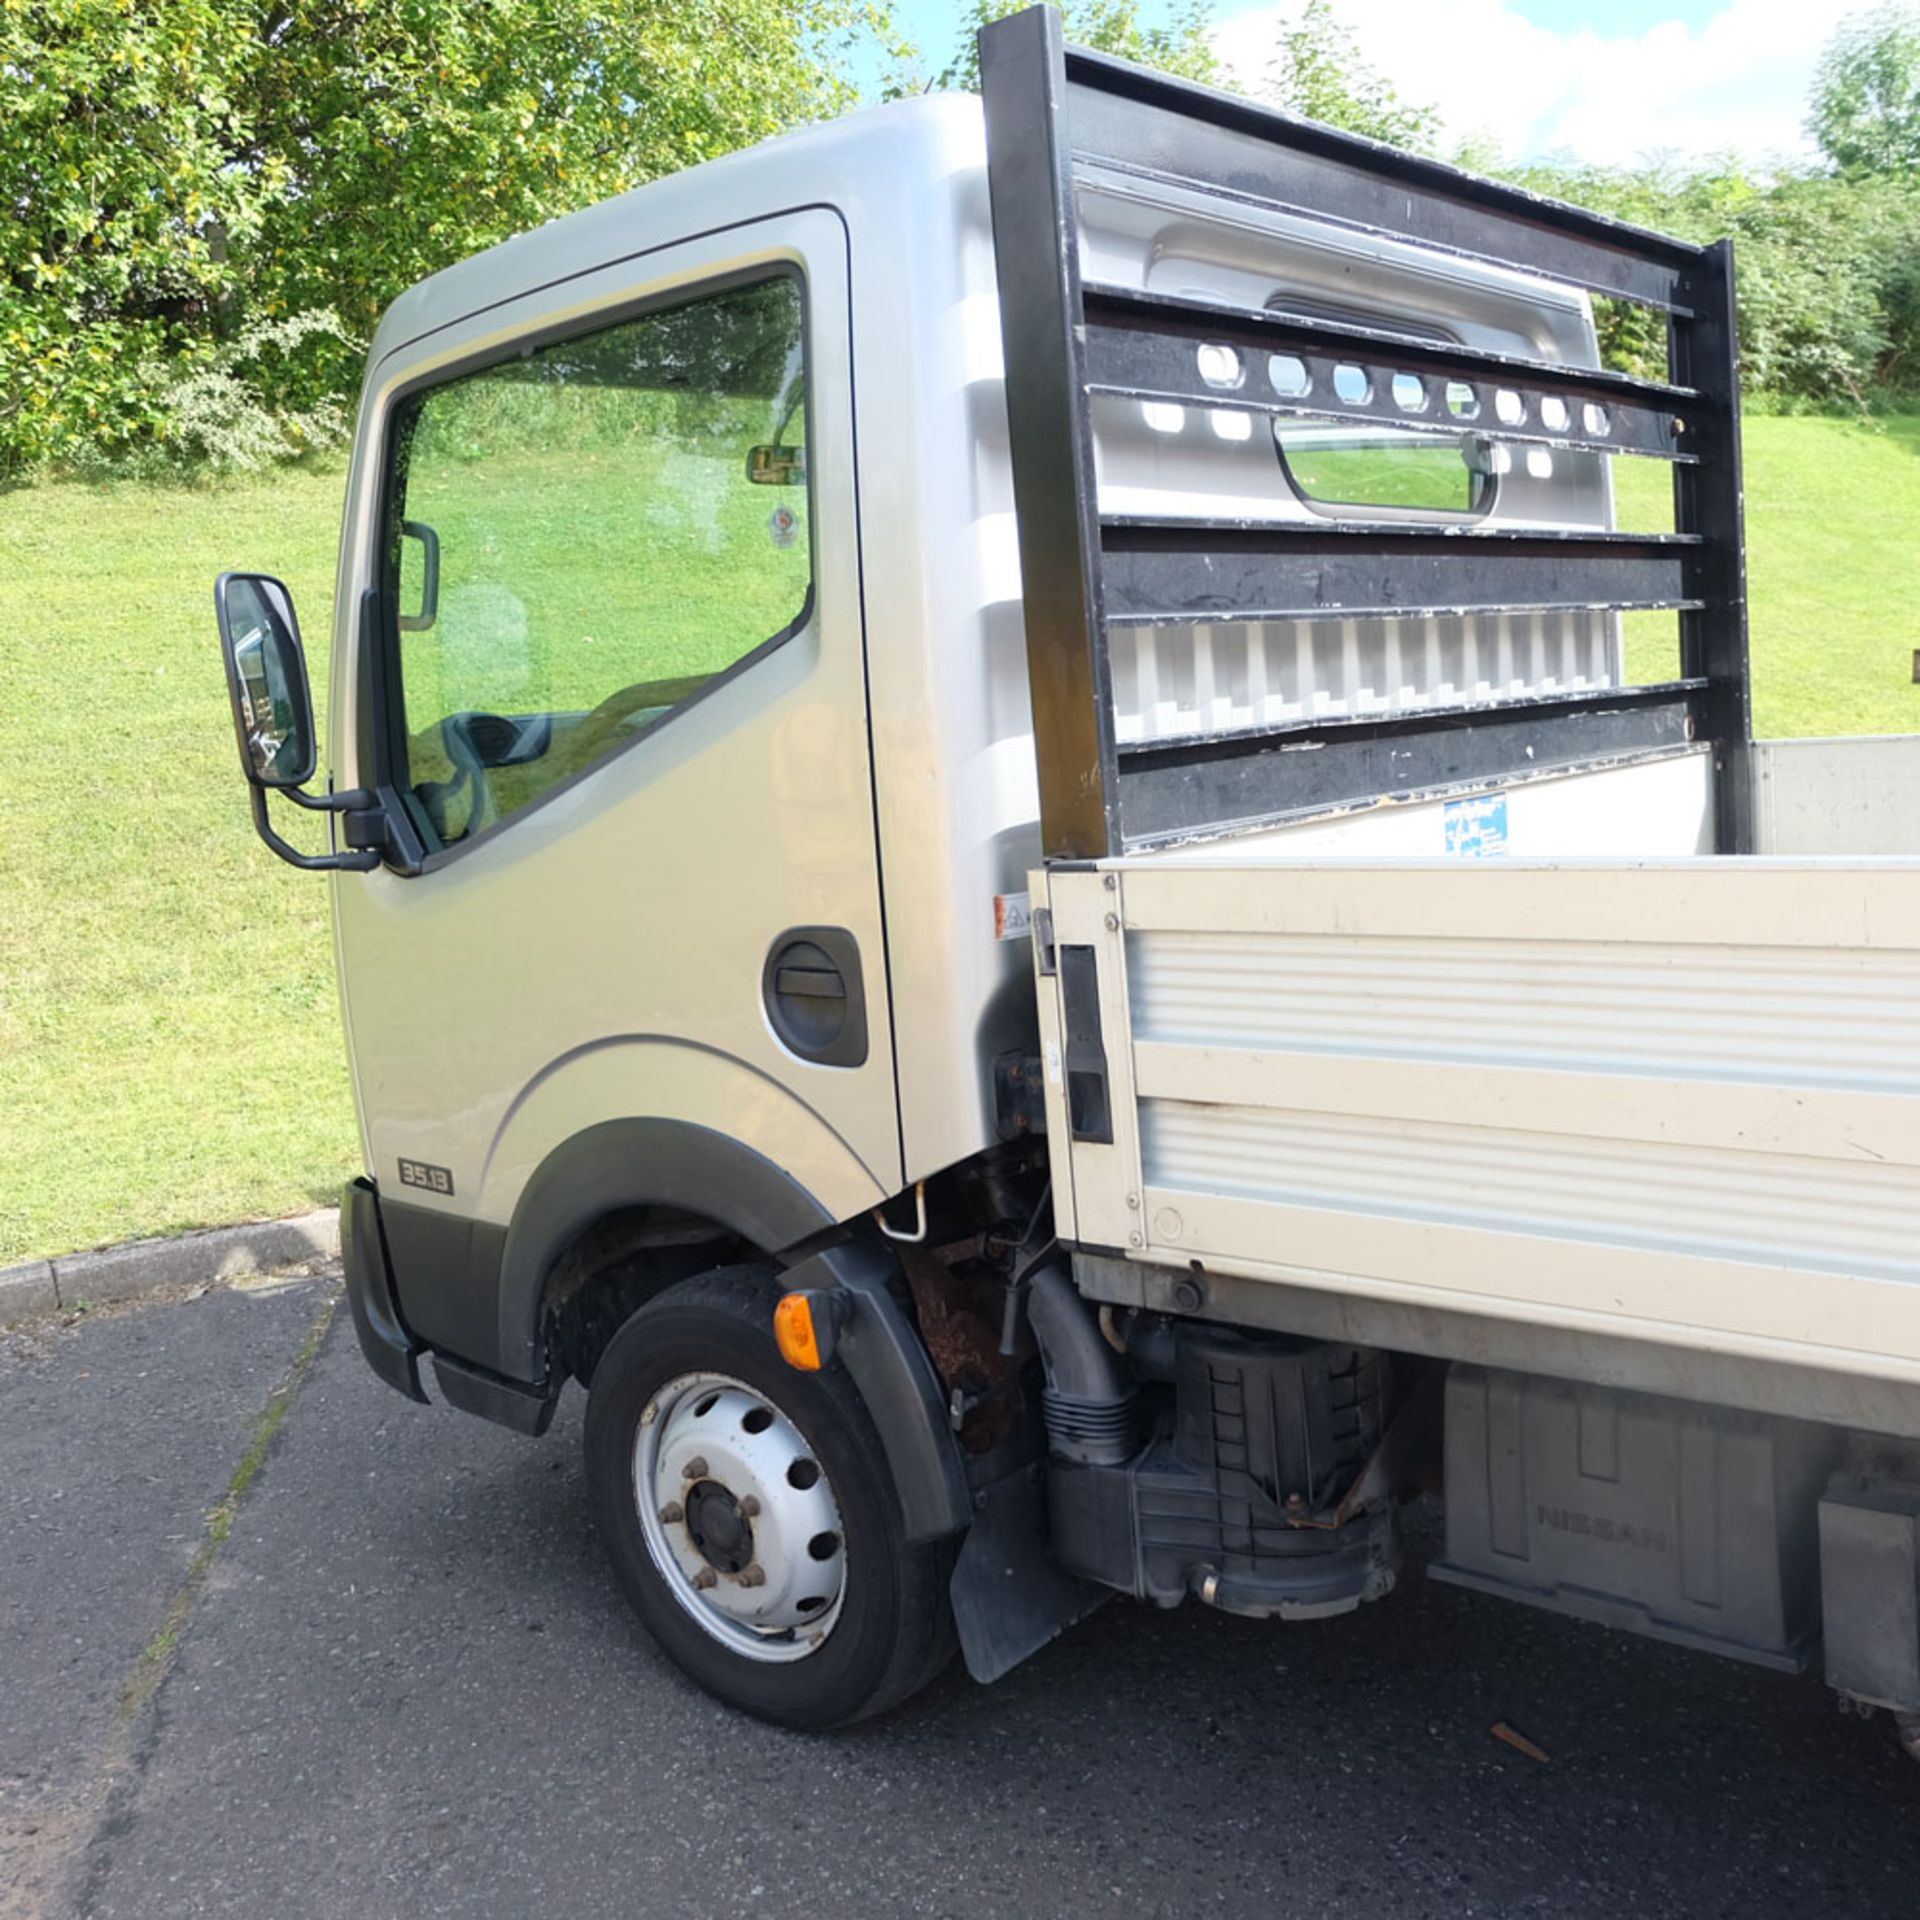 NISSAN CABSTAR 35.13. 2 Axle-Rigid Body Pickup Truck. 3500KG Gross Weight. Year 2007. - Image 9 of 16